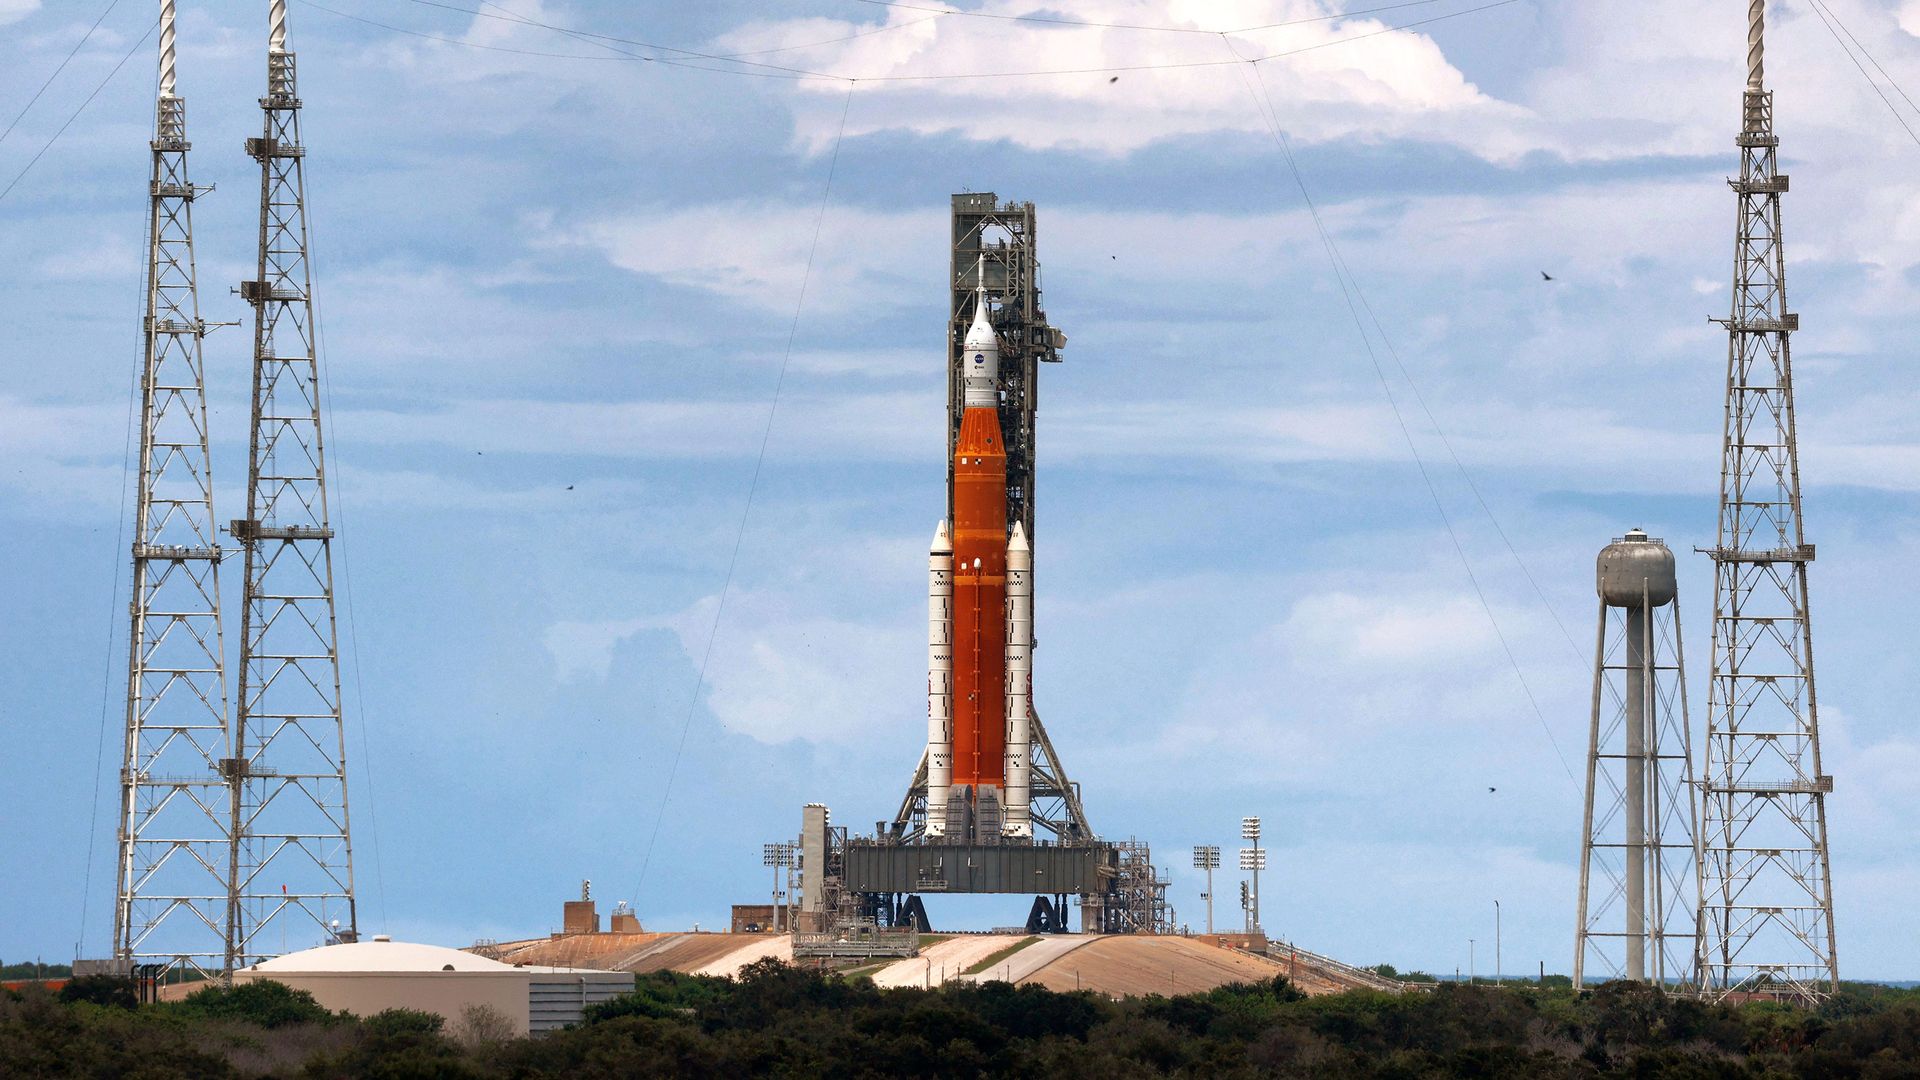 Artemis I, NASA's Space Launch System heavy-lift rocket carrying the Orion spacecraft, sits at Launch Pad 39-B at Kennedy Space Center, Florida. 